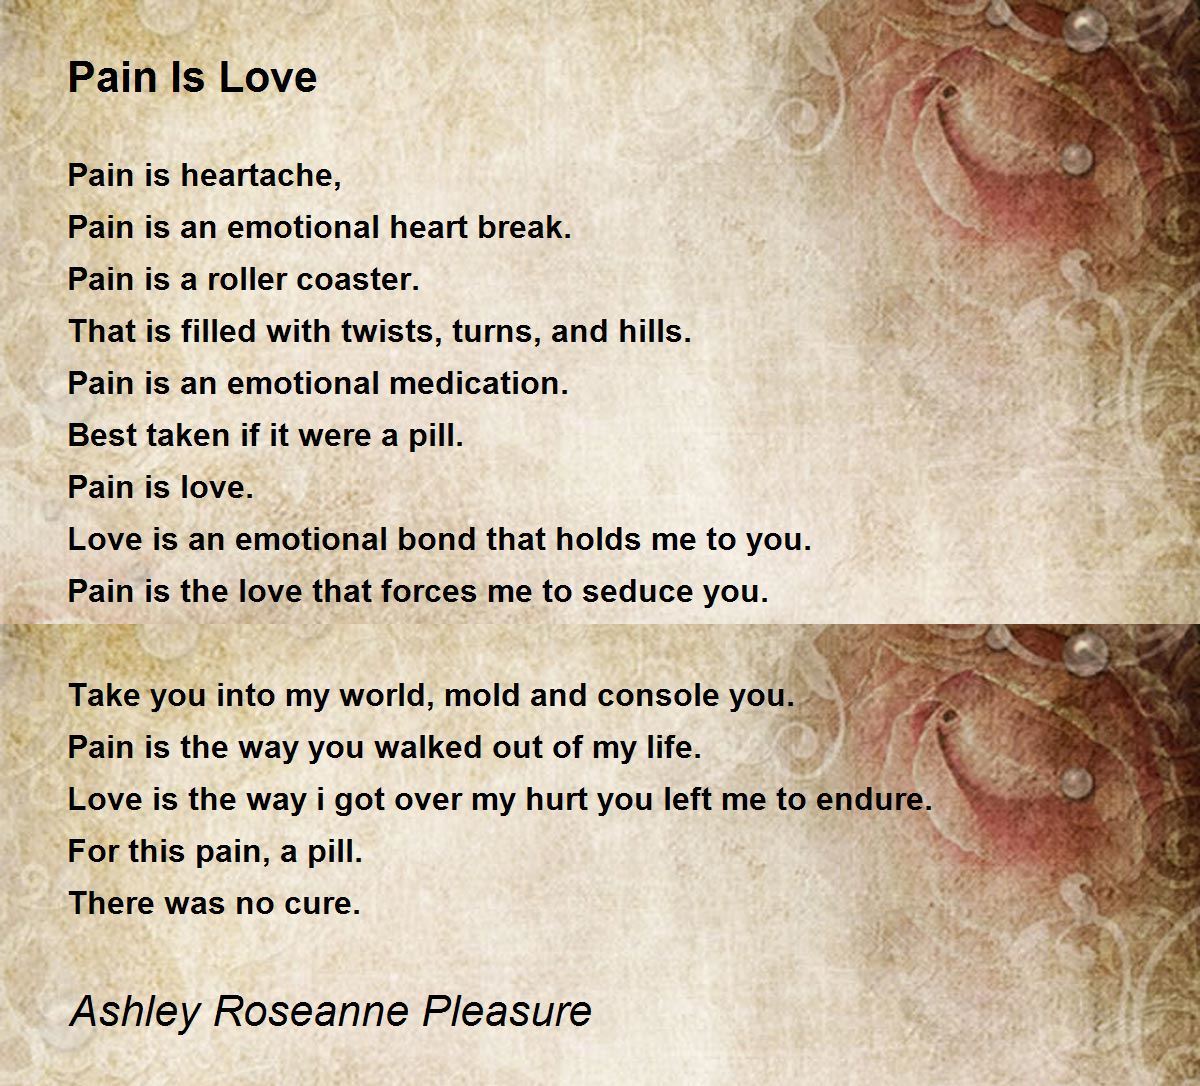 essay about love and pain